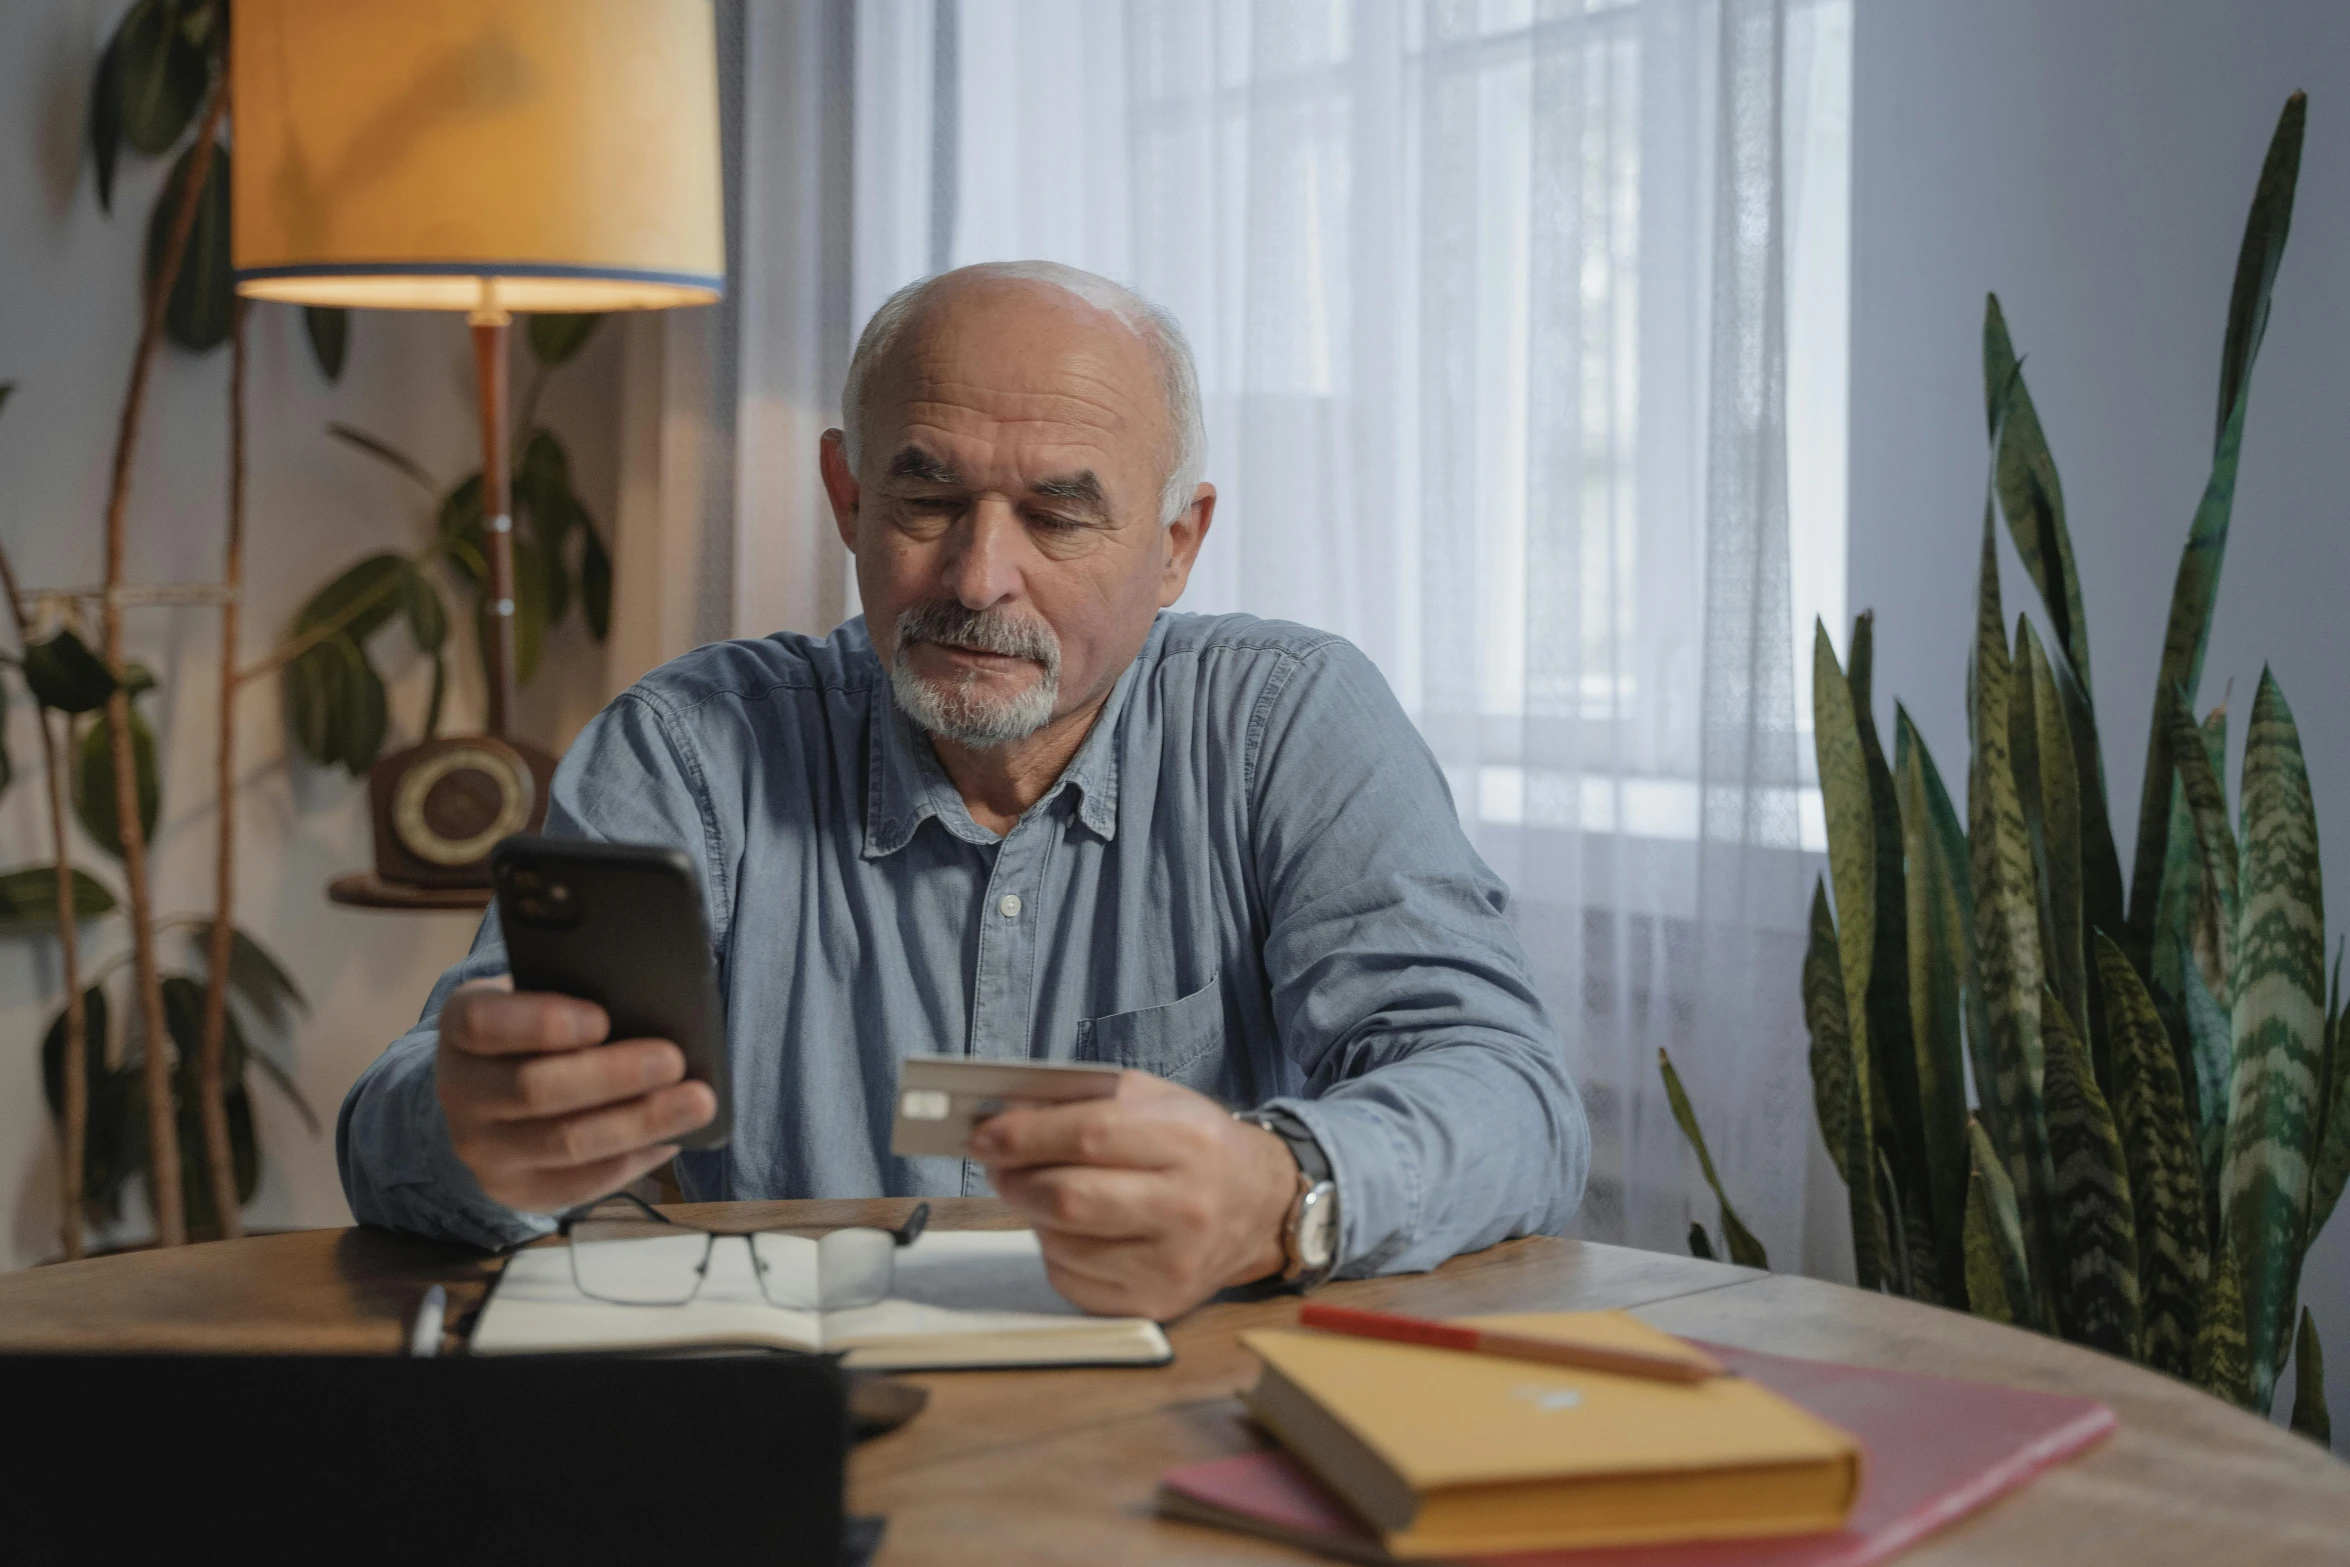 a man sitting at a table looking at his cell phone, an elderly, avatar image, professional shot, thumbnail